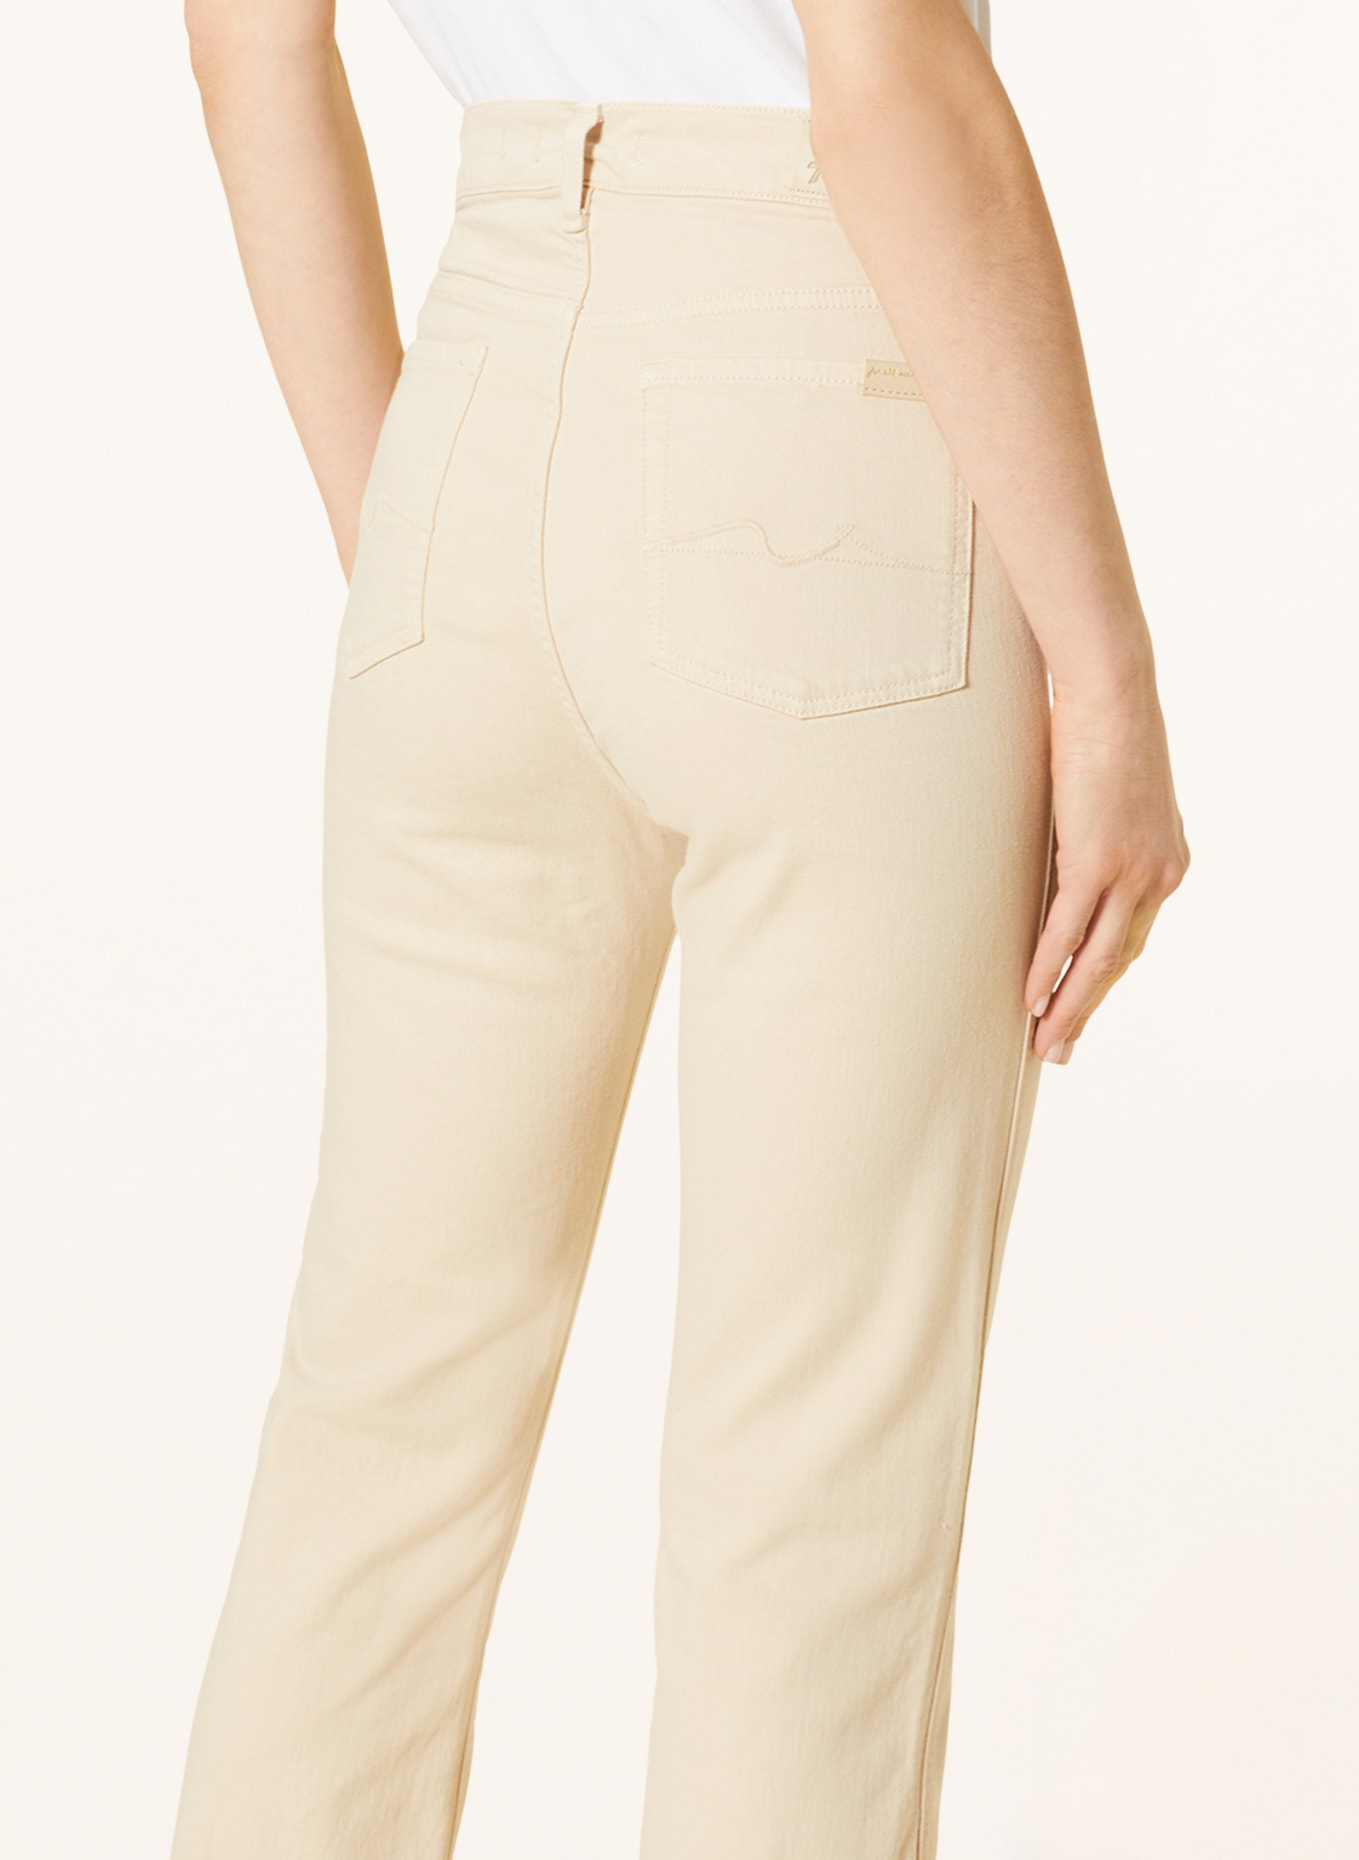 7 for all mankind Jeans, Color: CREAM (Image 5)